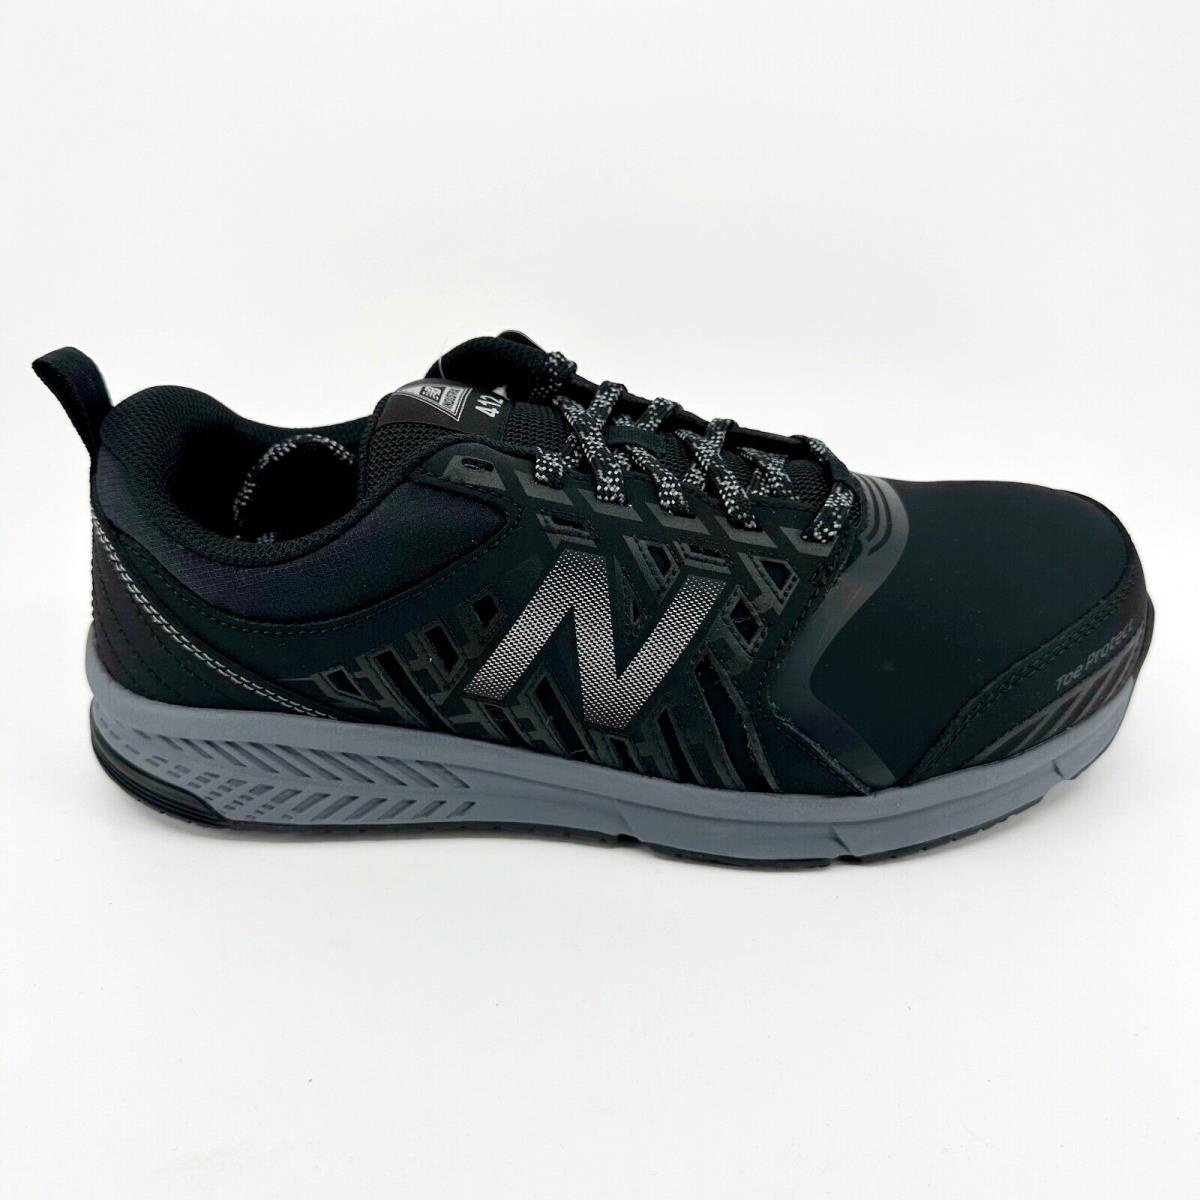 New Balance 412v1 Alloy Toe Black Mens Industrial Work Safety Shoes MID412B1